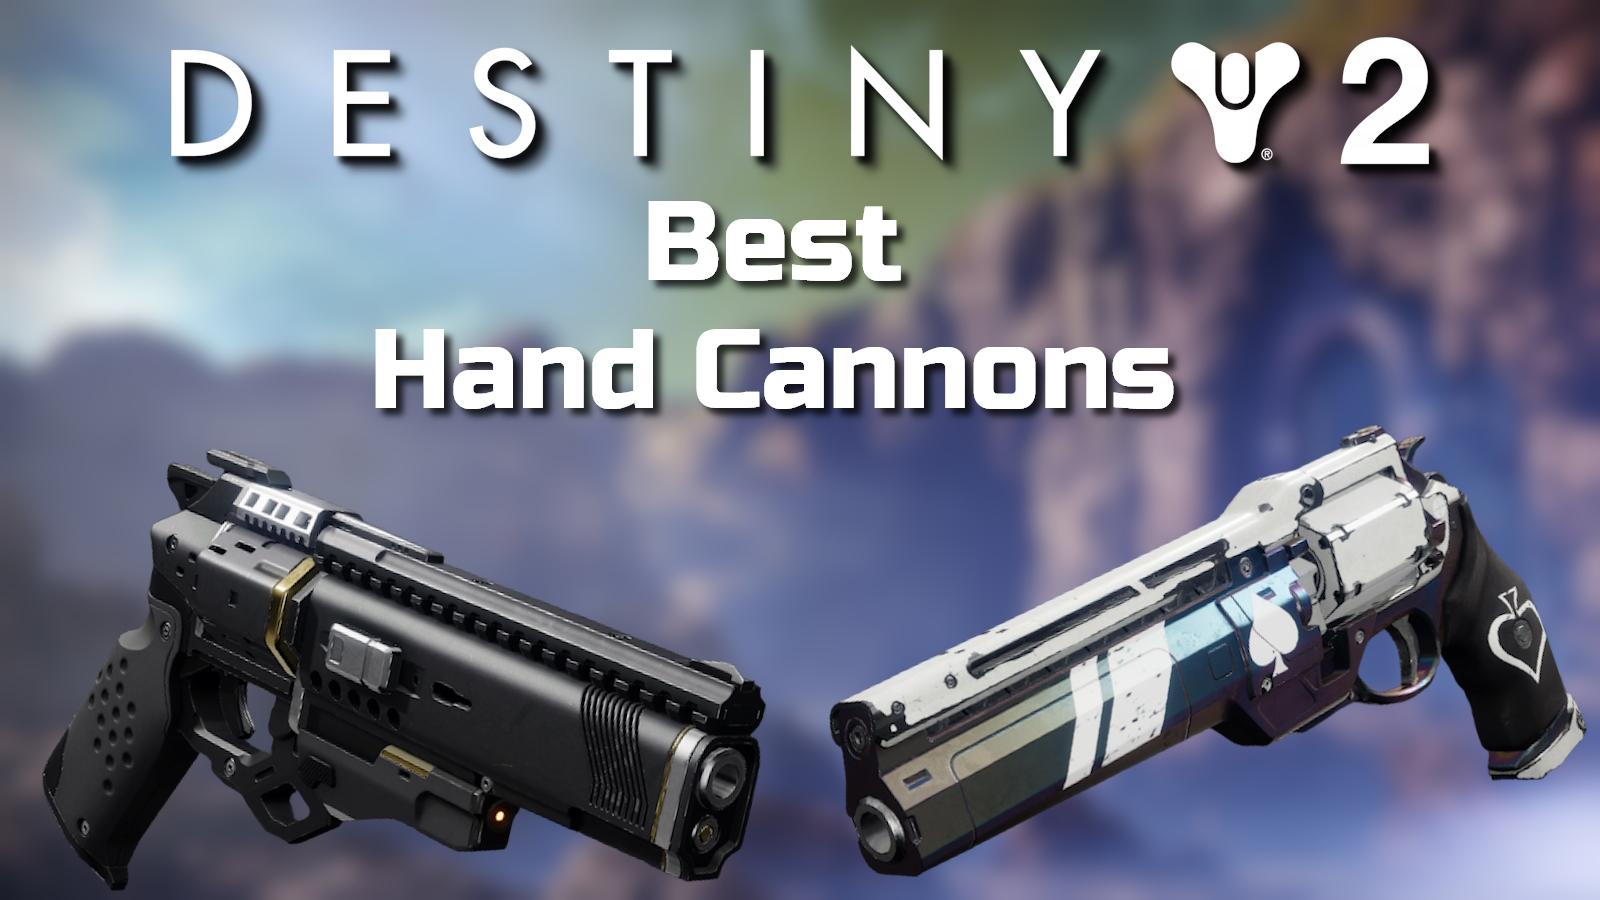 The Best Hand Cannons in Destiny 2 for PvE and PvP content.